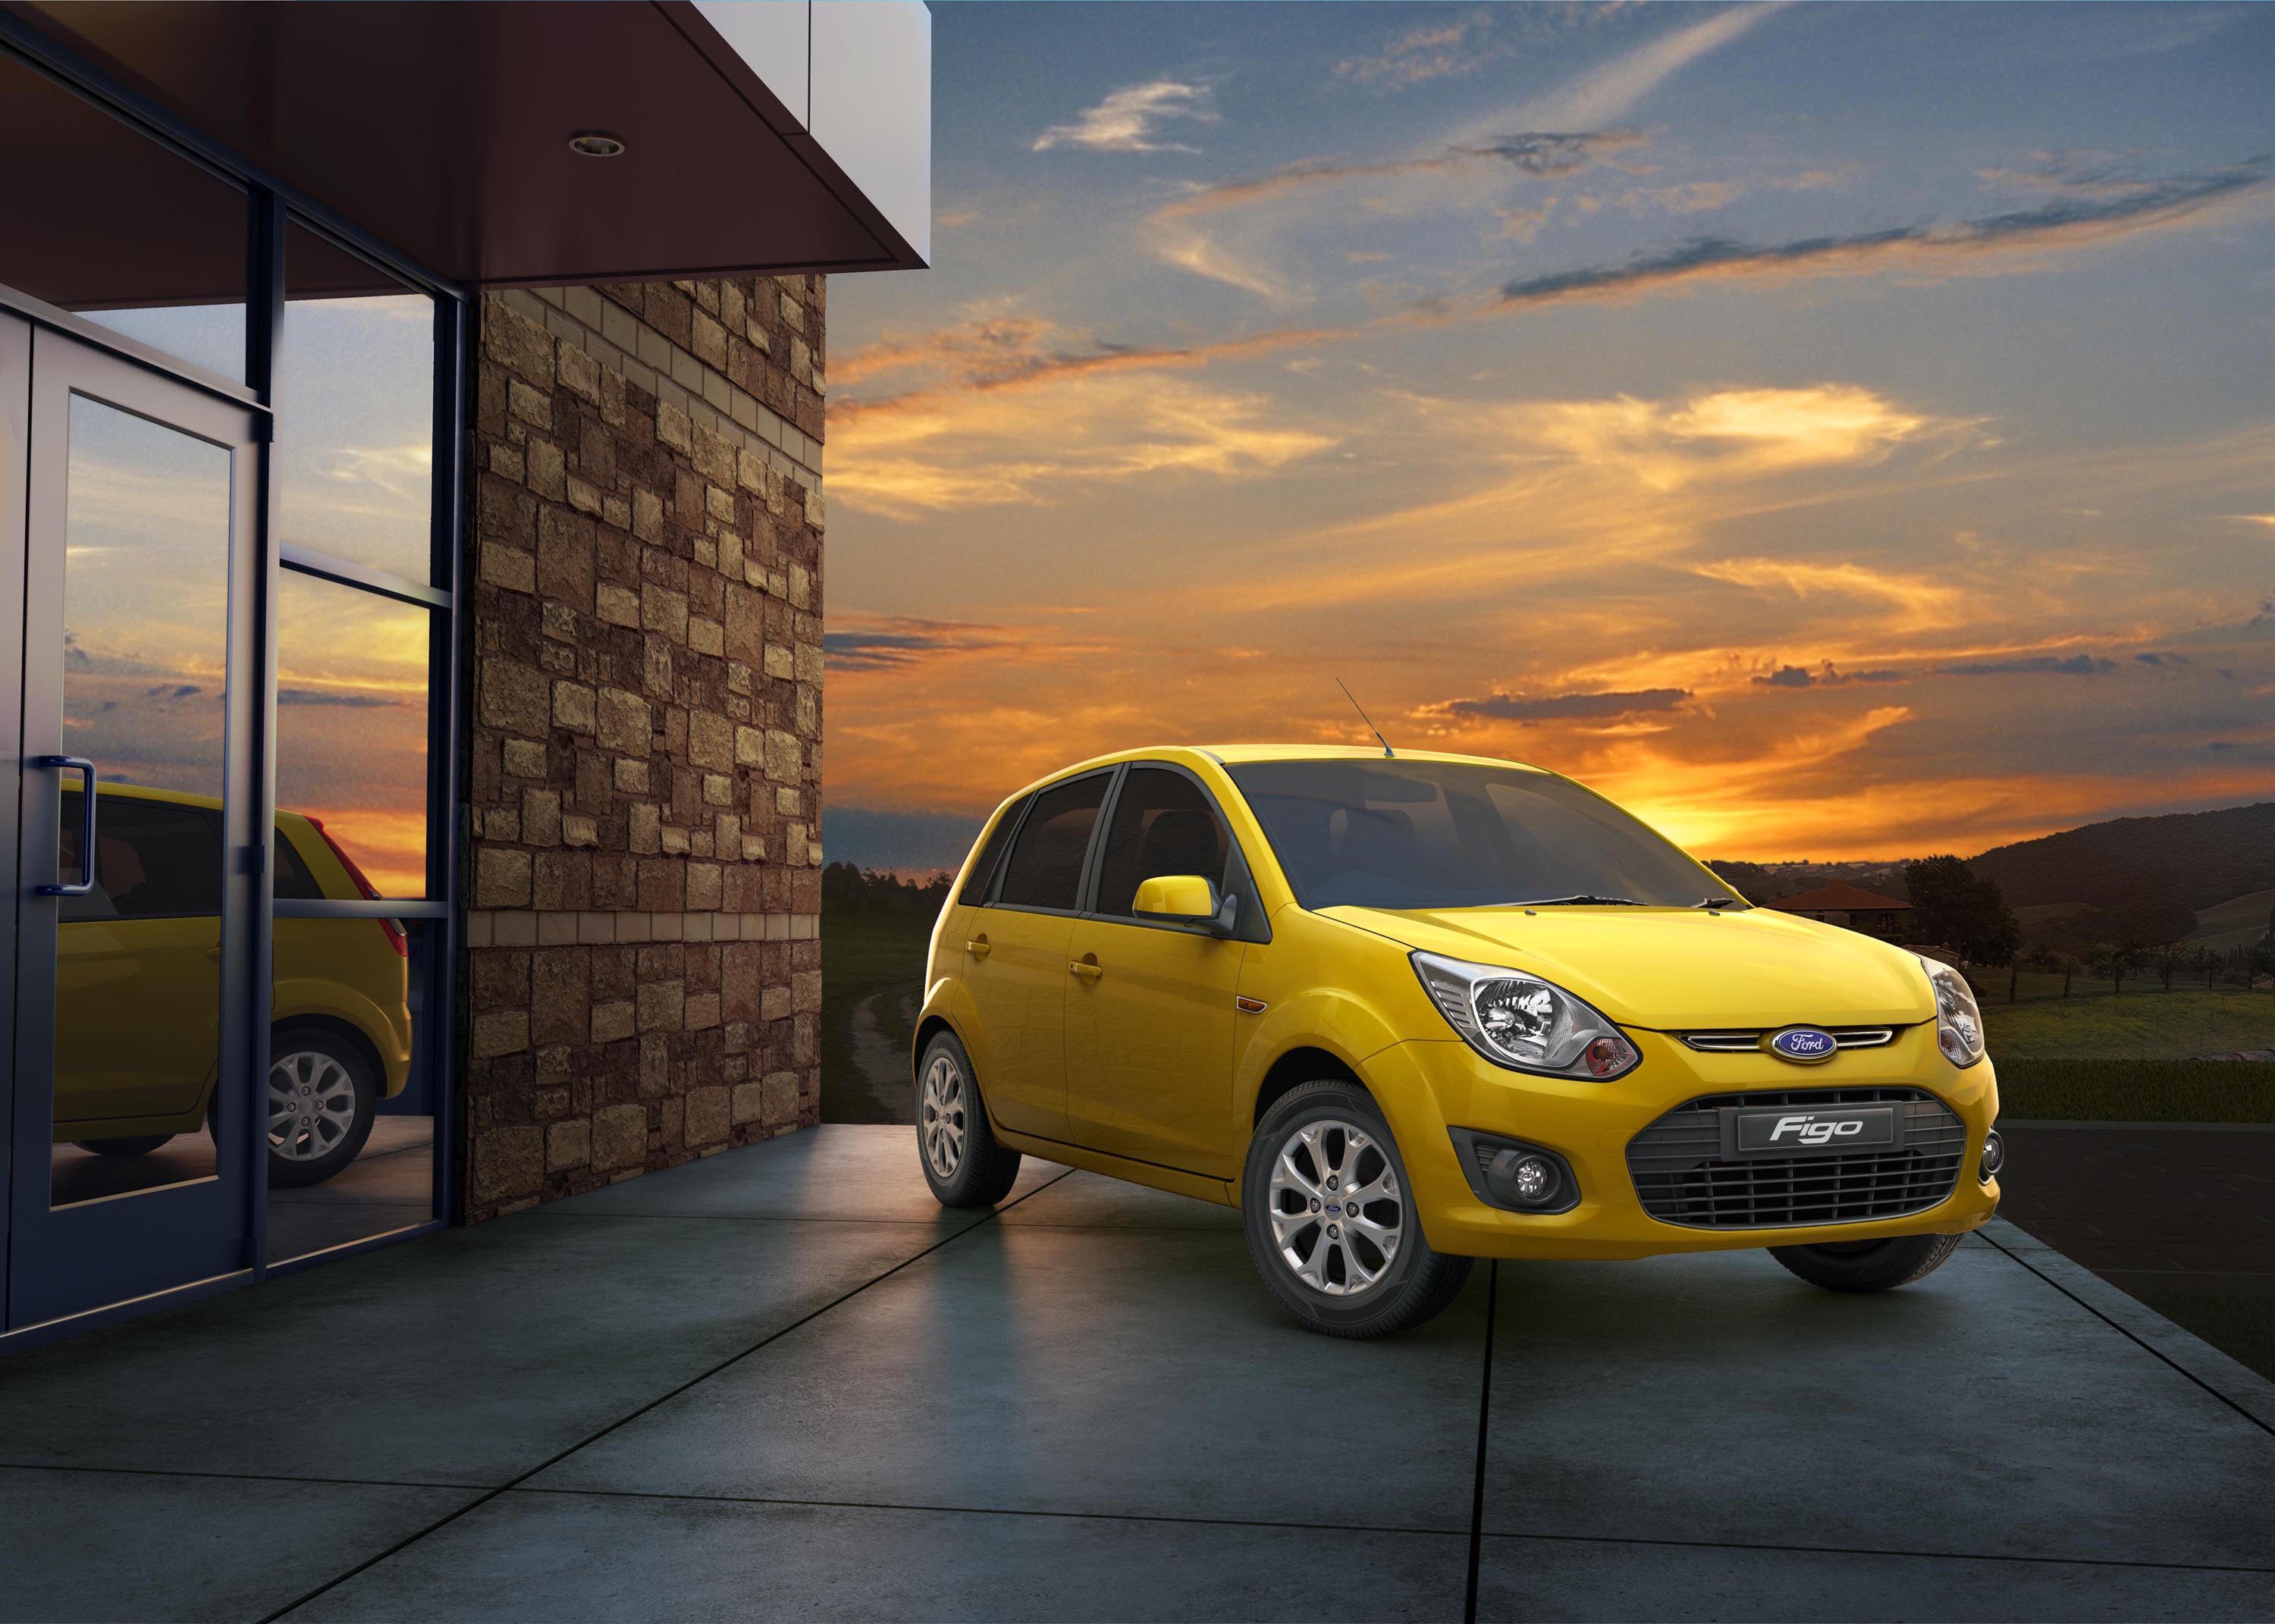 2013 Ford Figo Adds New Design Elements and Smart Features